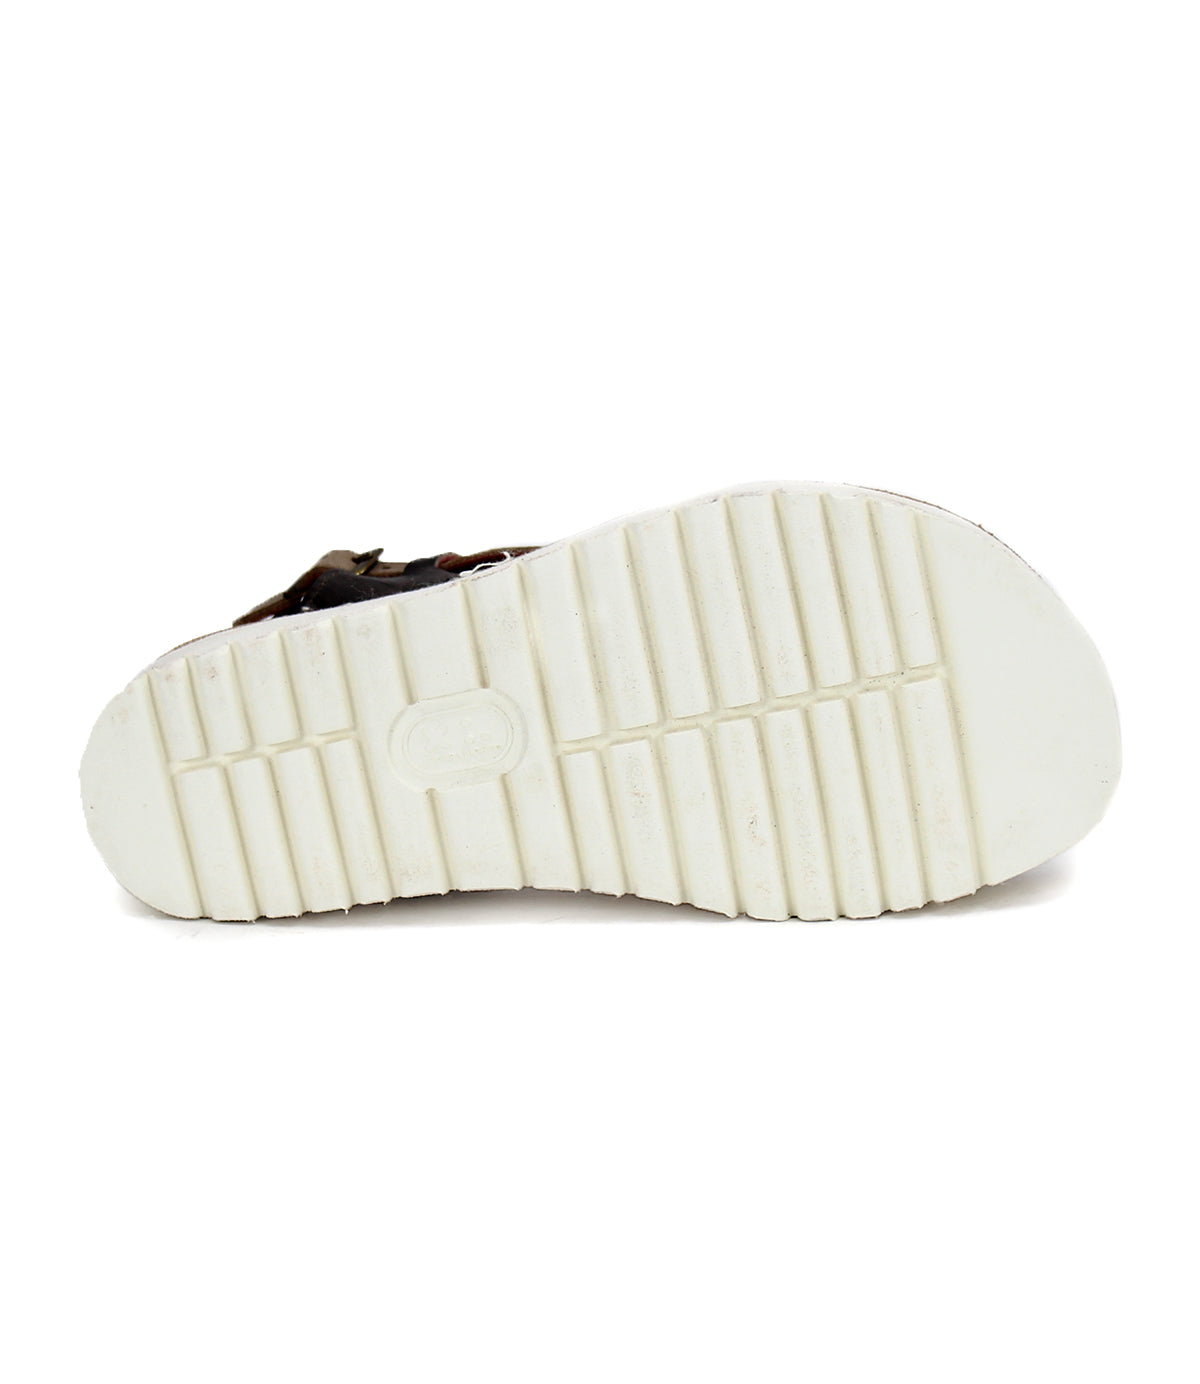 A pair of Bed Stu women's Crawler sandals with a white sole and multicolor strappy upper.